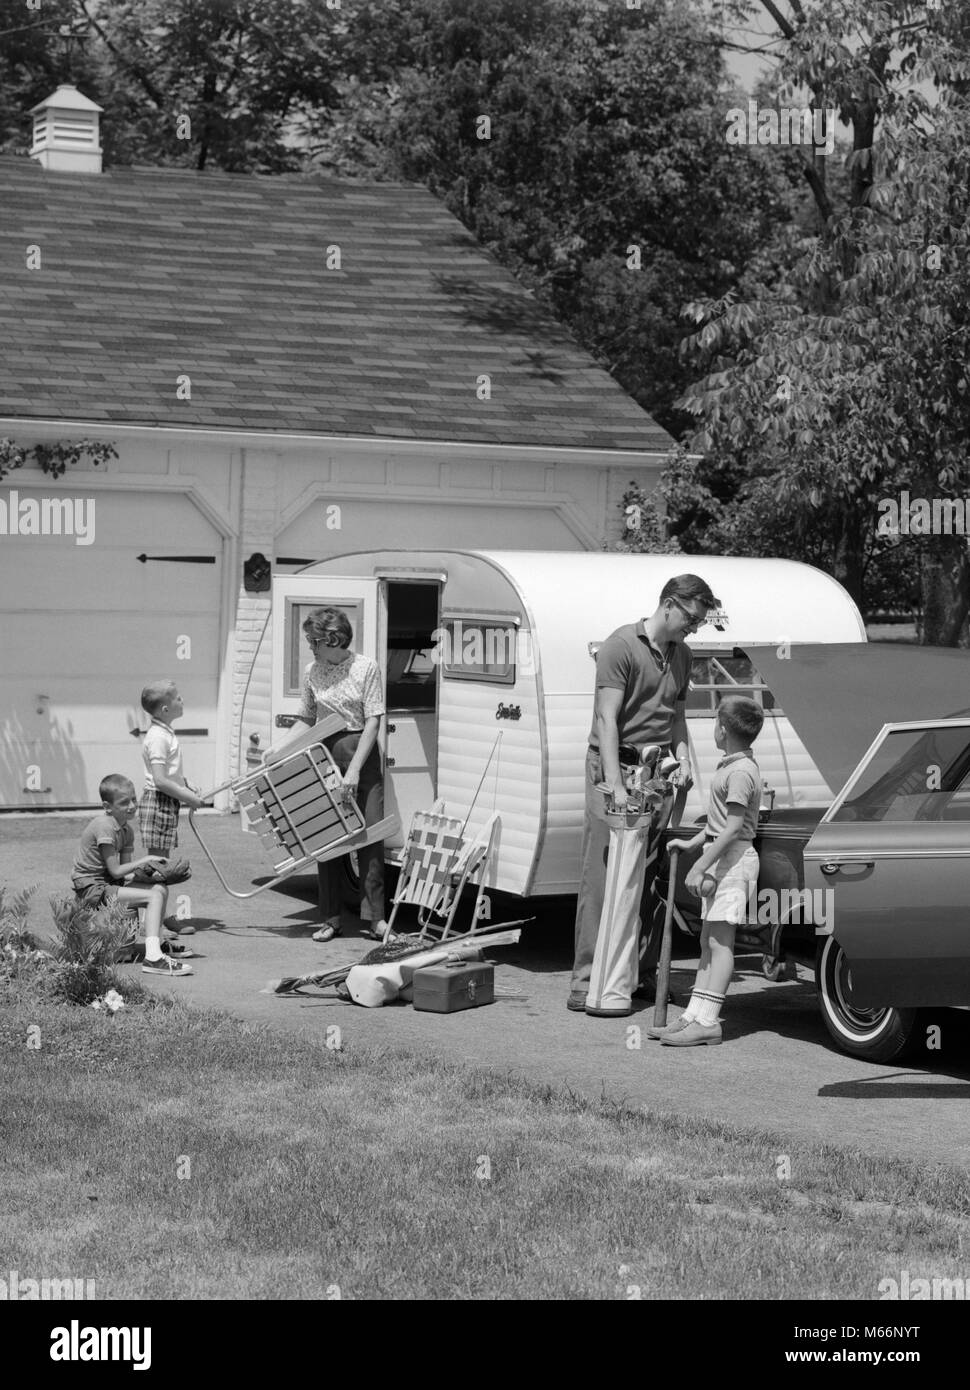 1960s FAMILY OF FIVE LOADING LAWN CHAIRS SPORTS EQUIPMENT INTO CAR TRAILER DRIVEWAY - m7032 HAR001 HARS AUTO JUVENILE MOTOR SAFETY TEAMWORK CAUCASIAN SONS LIFESTYLE PARENTING FEMALES 5 BROTHERS RELATION HUSBANDS HOME LIFE COPY SPACE FRIENDSHIP HALF-LENGTH AUTOMOBILE SIBLINGS TRANSPORTATION FAMILIES NOSTALGIA FATHERS HUSBAND AND WIFE TOGETHERNESS HUSBANDS AND WIVES LOADING WIVES ADVENTURE MOMS PARENTHOOD AND AUTOS DADS EXCITEMENT RECREATION PARENTAL AUTOMOTIVE MOTORING RELATIONSHIPS SIBLING COOPERATION AUTOMOBILES ESCAPE SMALL GROUP OF PEOPLE JUVENILES MALES MID-ADULT MID-ADULT MAN Stock Photo